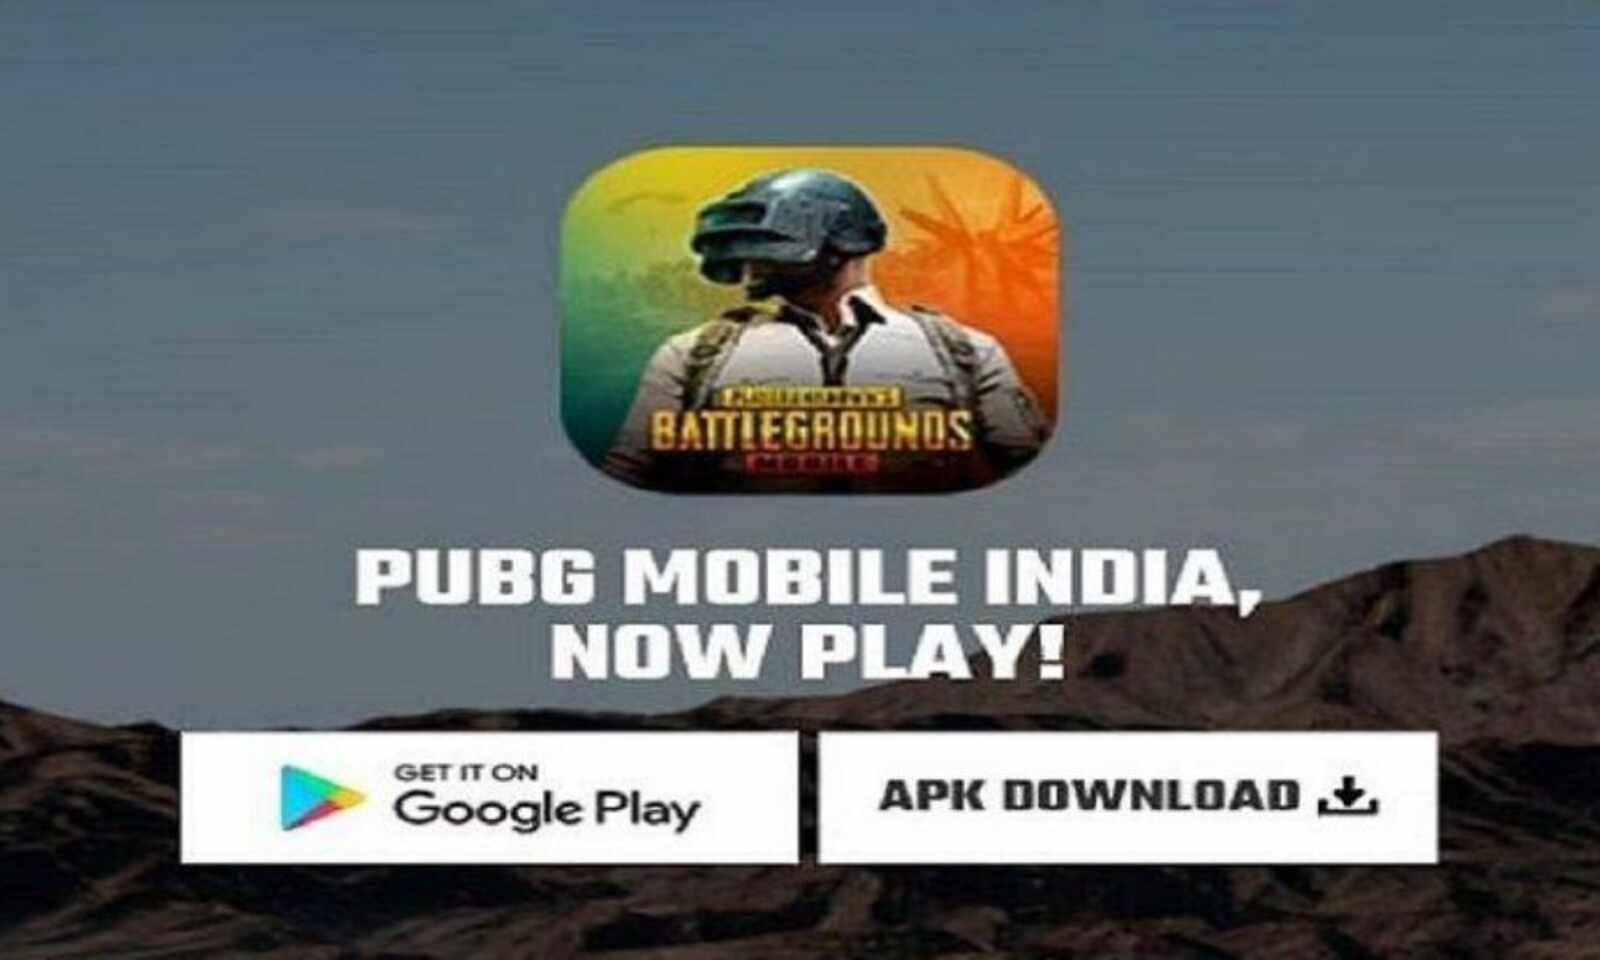 Pubg Mobile India Apk Download Link Seen On The Websit